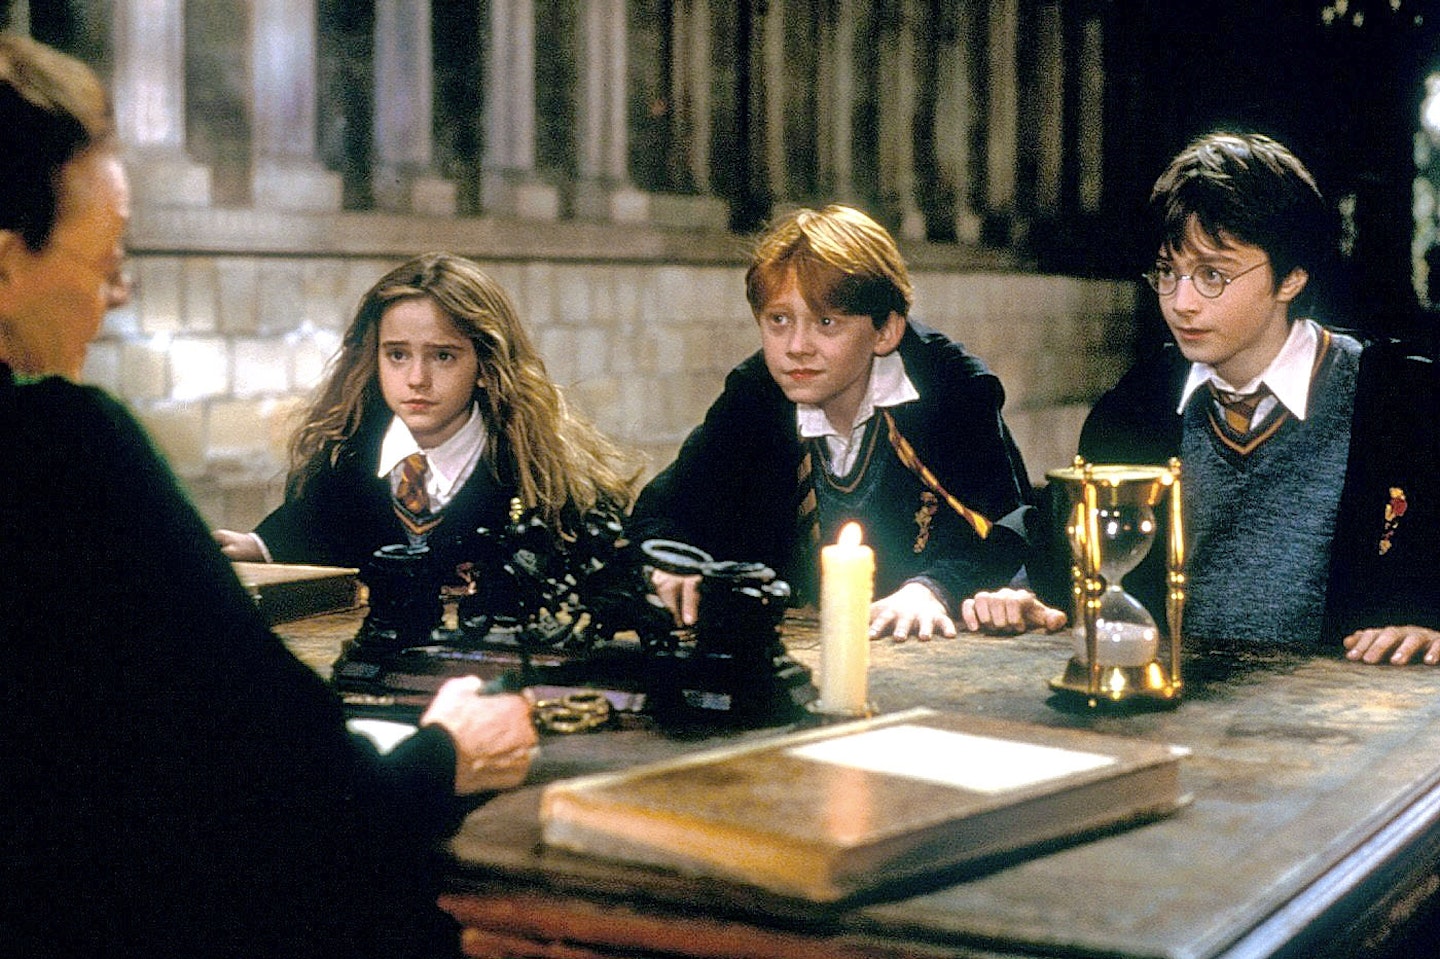 Harry Potter and the Philosopher's Stone screen grab